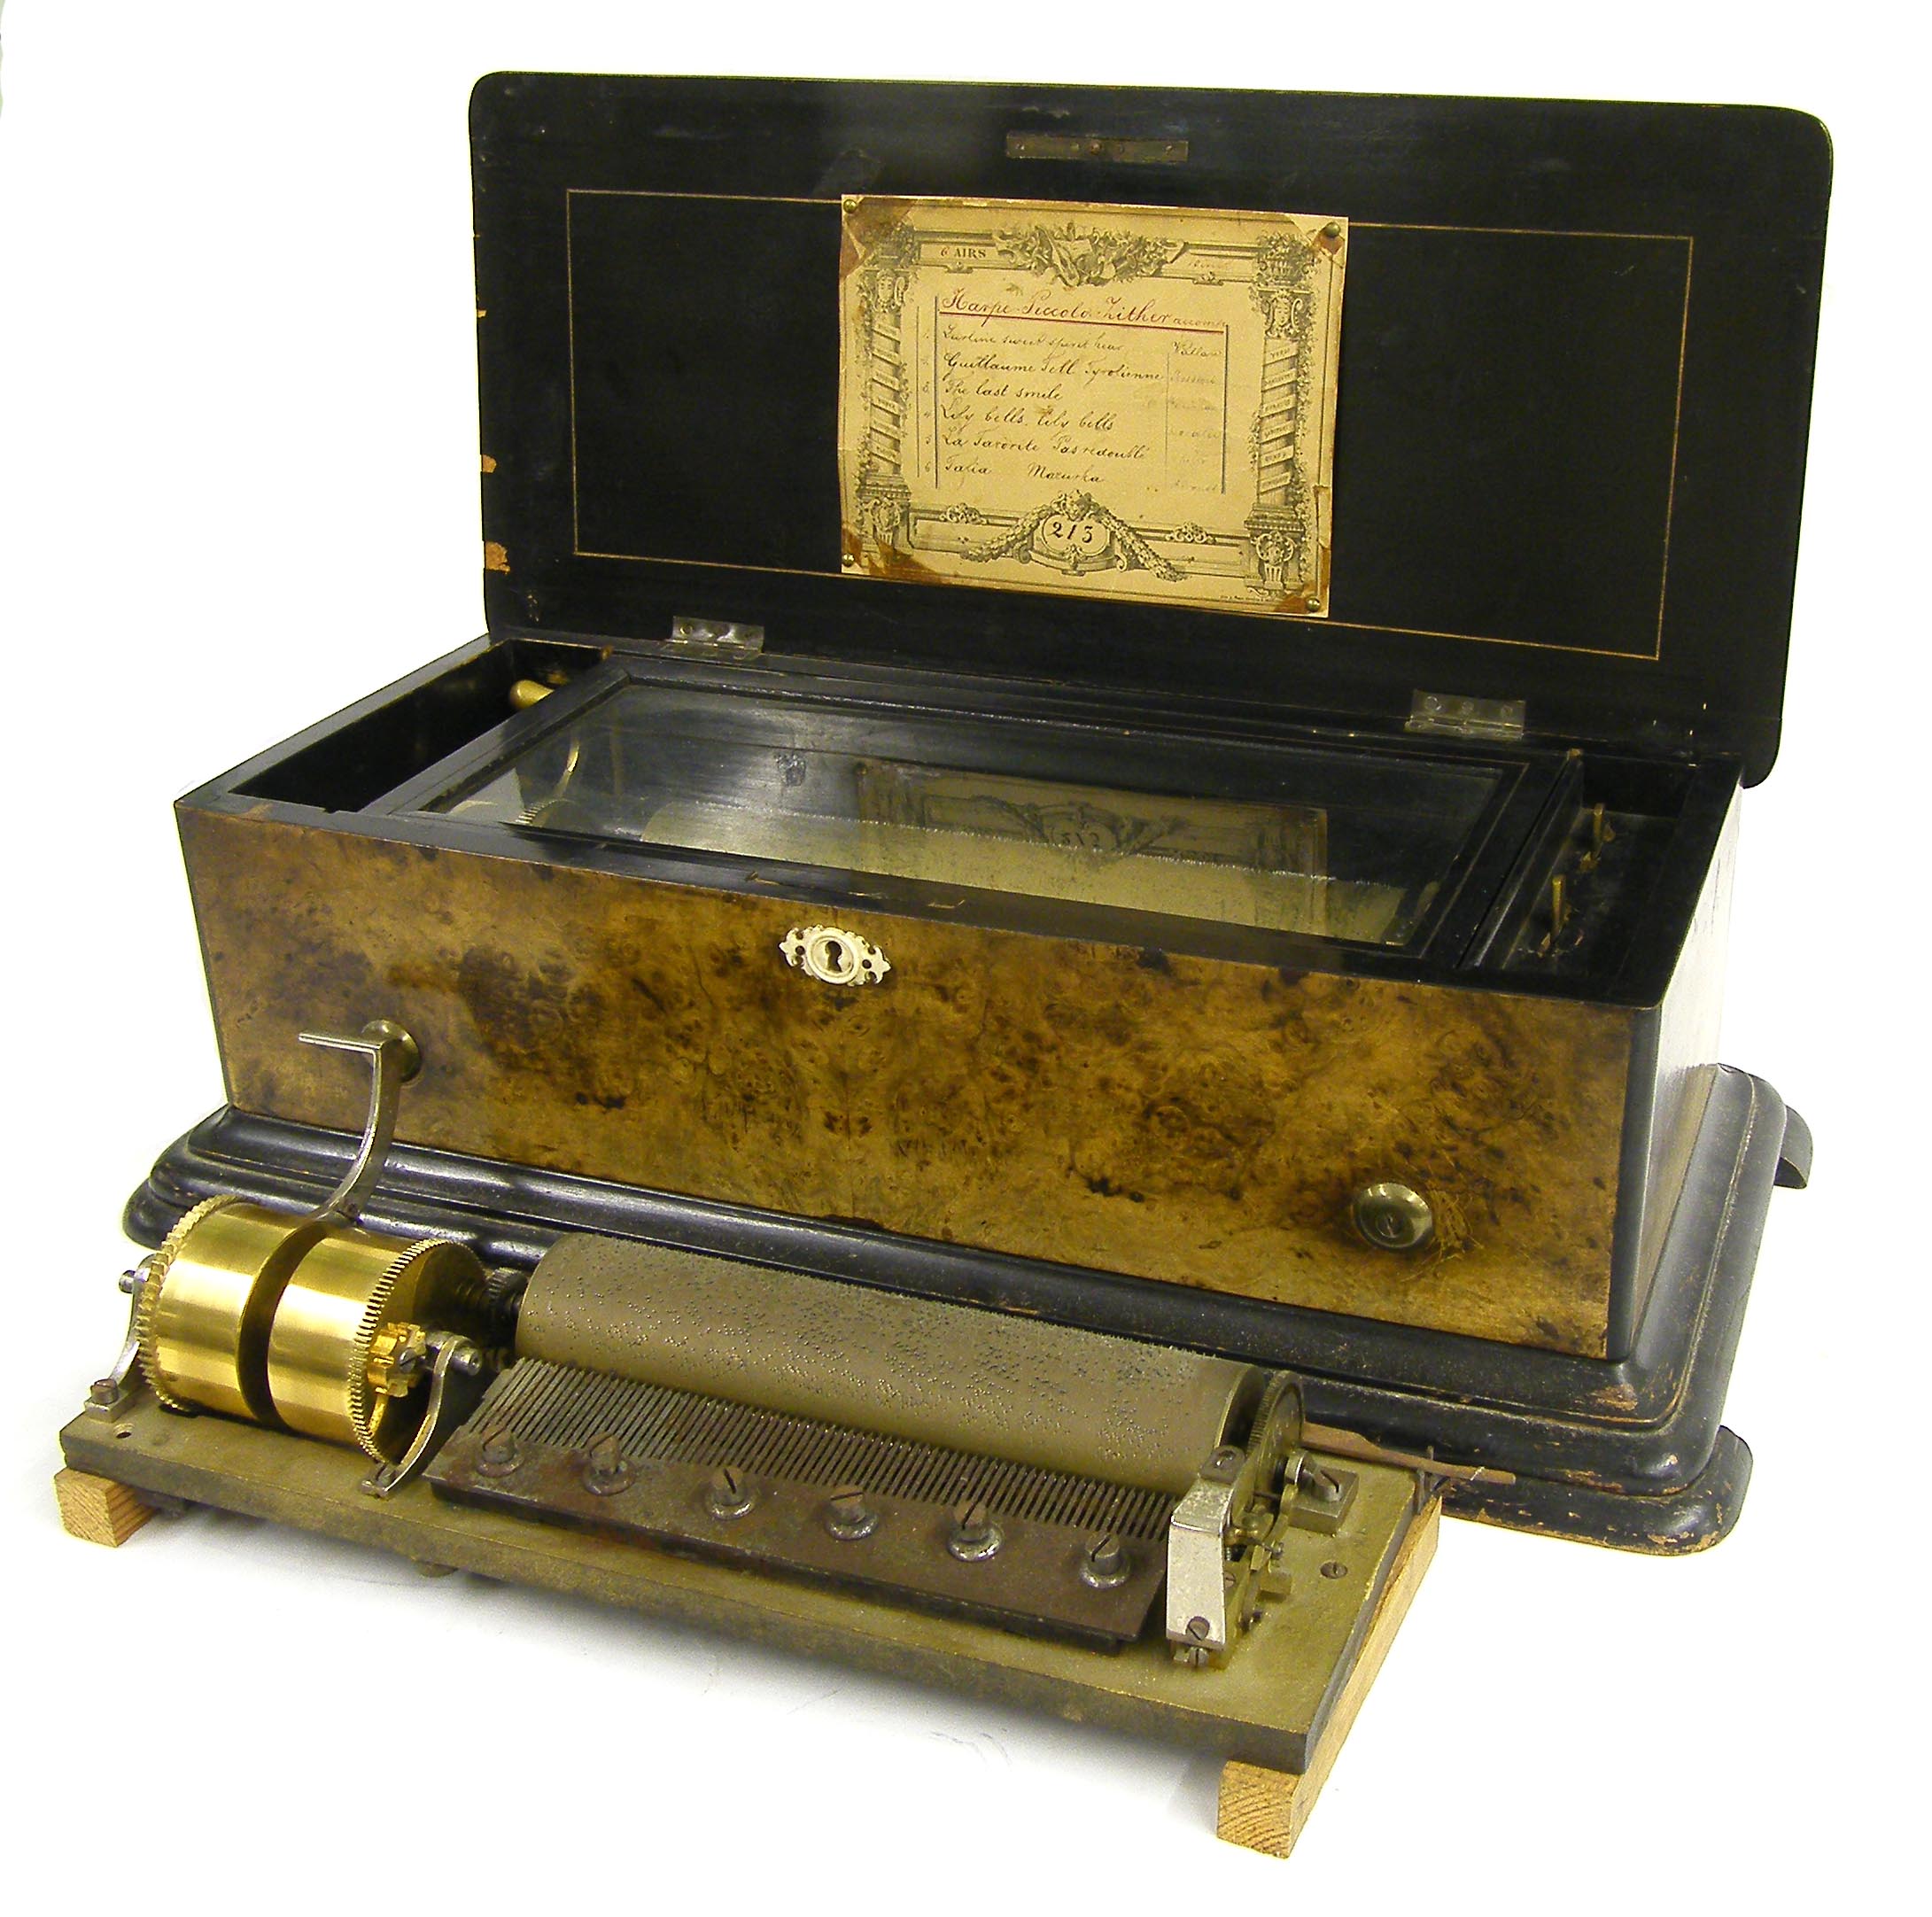 Swiss music box, the 11" cylinder playing on six airs, with original tune sheet and stamped no. 213,